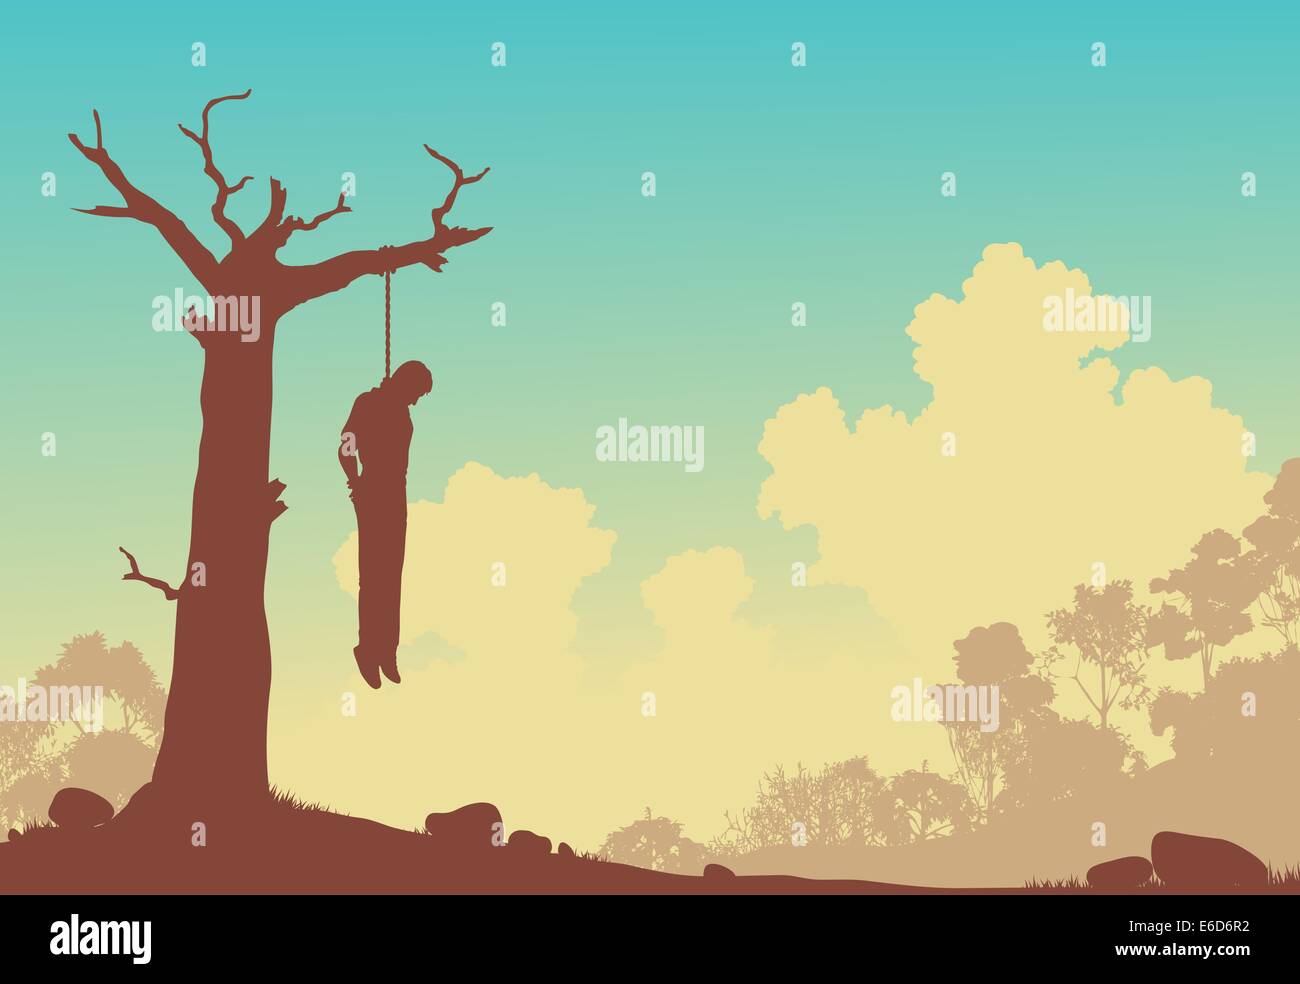 Editable vector silhouette of a man hanged from a dead tree Stock Vector